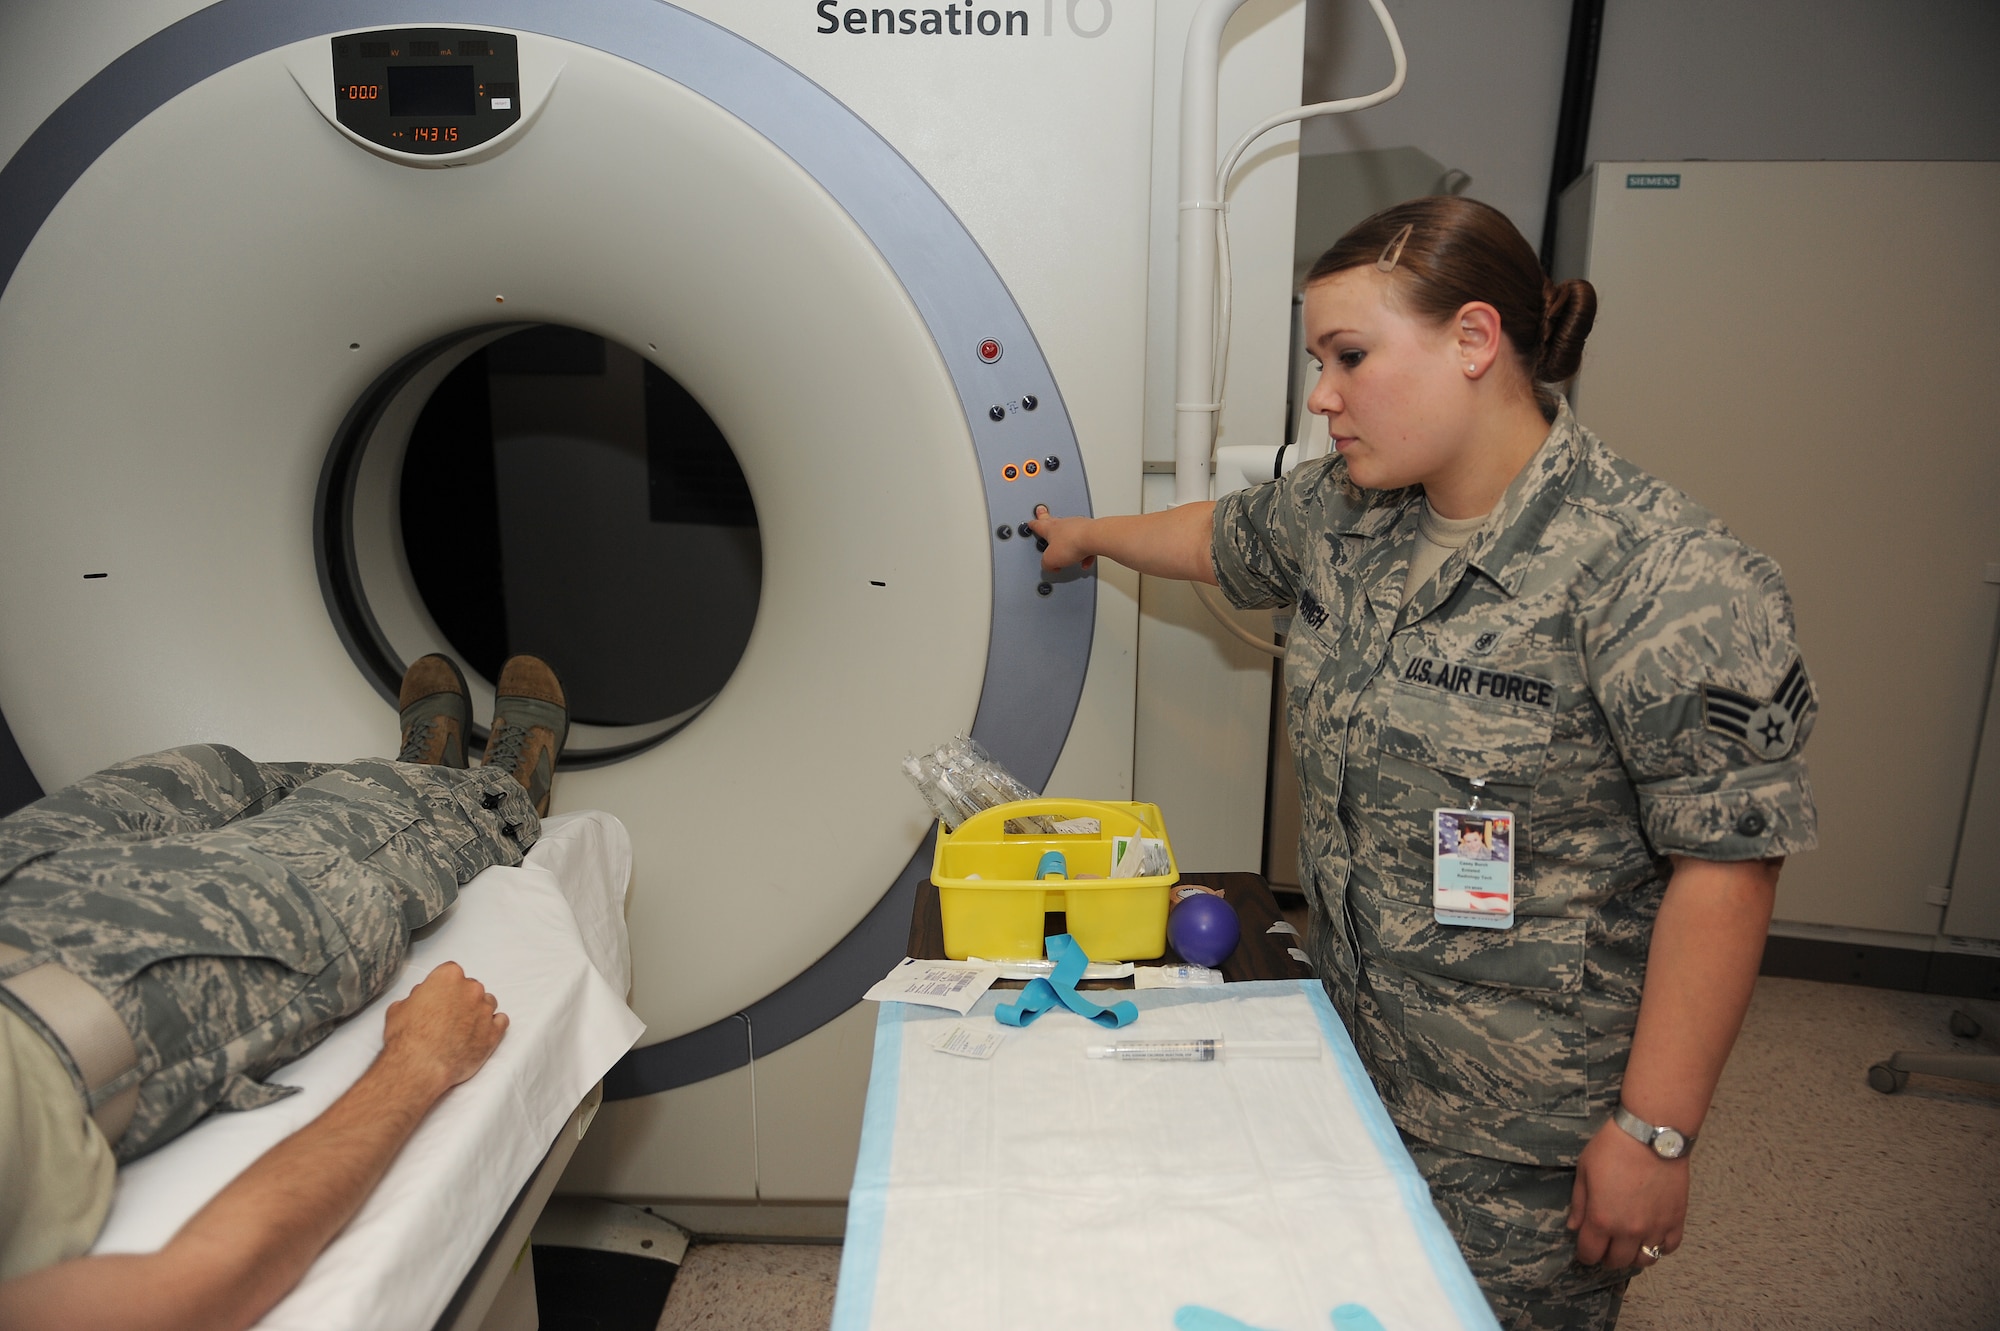 Senior Airman Casey Burch raises a patient before moving him into a CT scanner at Scott Air Force Base, Ill., June 3, 2014.  A CT scan is a high-tech medical test that helps the radiologist diagnose different types of diseases.  Burch is a 375th Medical Support Squadron radiology technologist.  (U.S. Air Force photo by Staff Sgt. Maria Bowman)